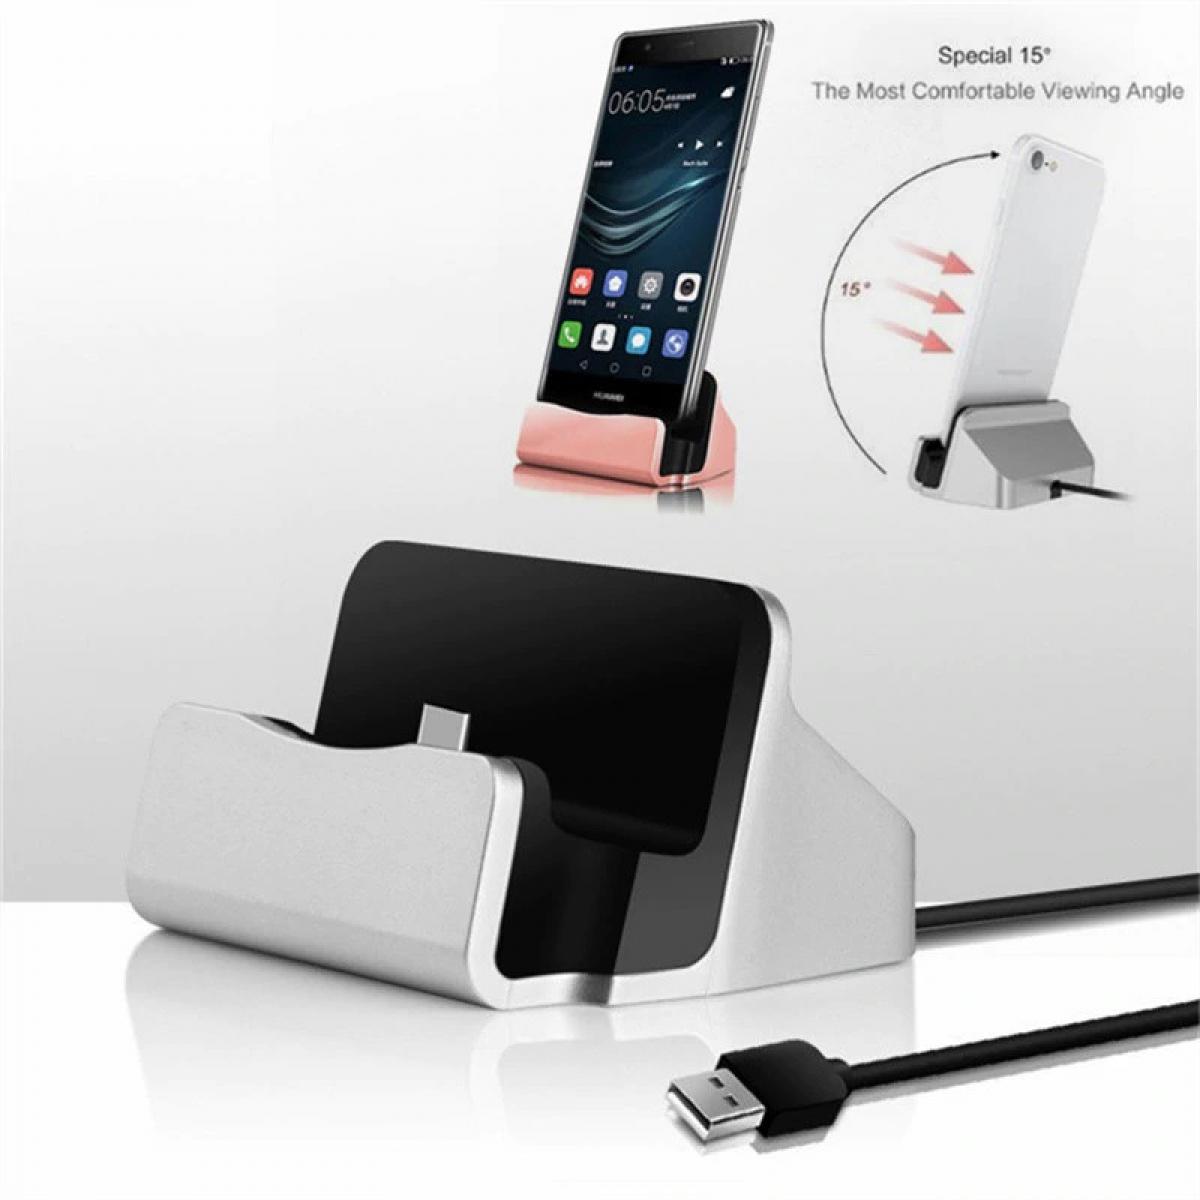 Shot - Station d'Accueil de Chargement pour SONY Xperia Z3 Smartphone Micro USB Support Chargeur Bureau (ROSE) - Station d'accueil smartphone